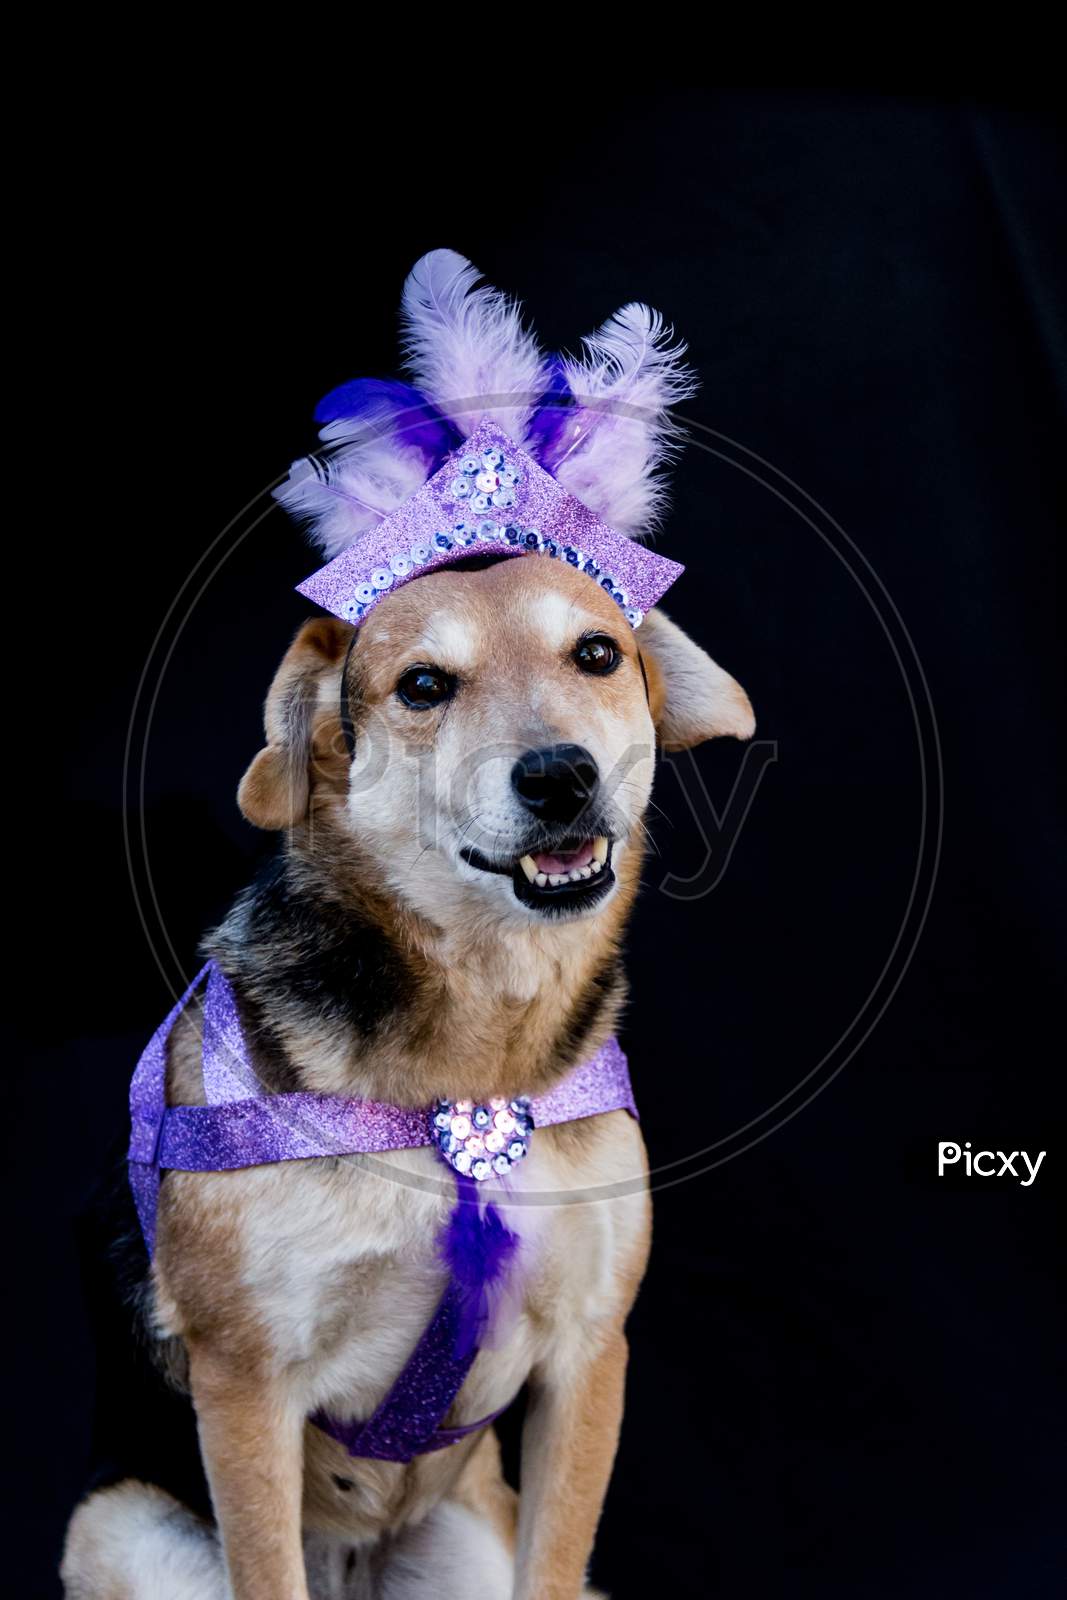 Portrait Of A Dog Dressed For Carnival, With Feathers, Sequins And Glitters